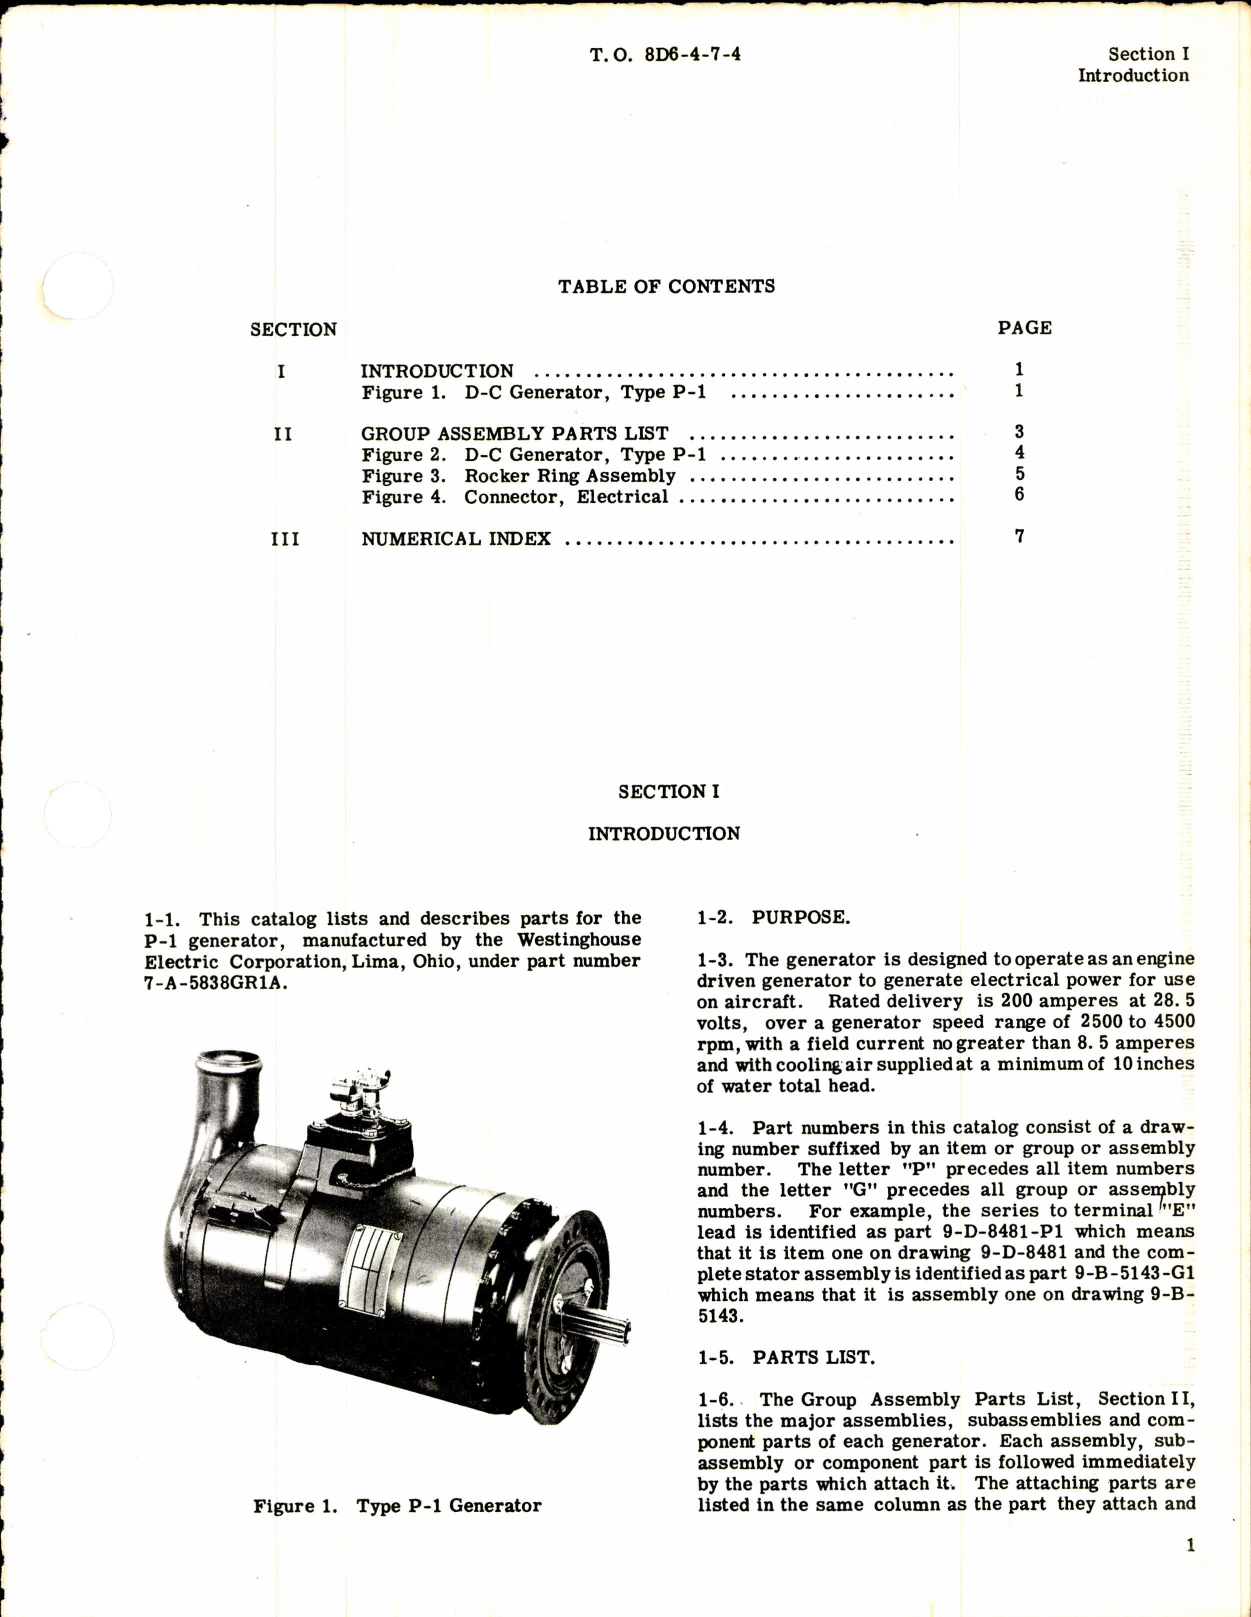 Sample page 3 from AirCorps Library document: D-C Generator Type P-1 Part Number 7-A-5838-GR 1A